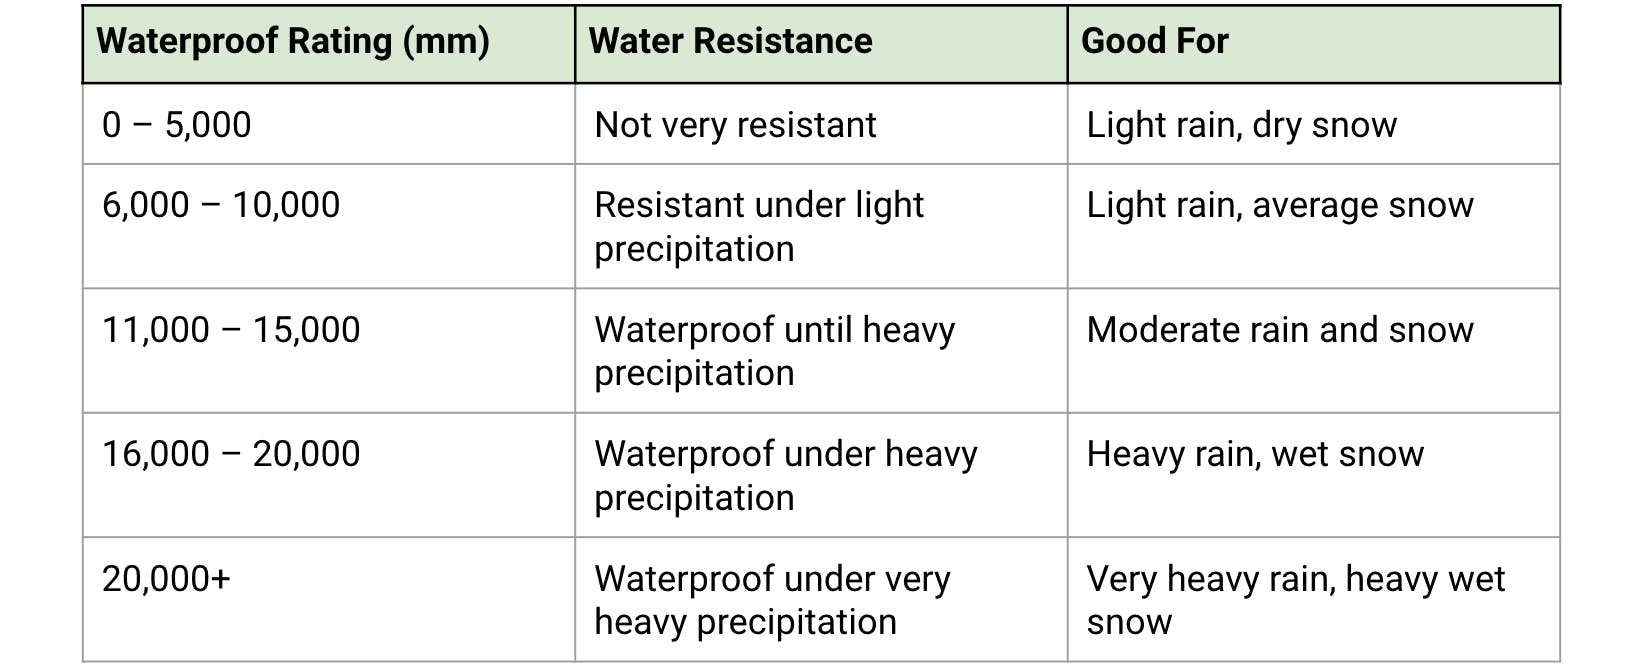 Table showing waterproof rating, water resistance, and what it's good for.